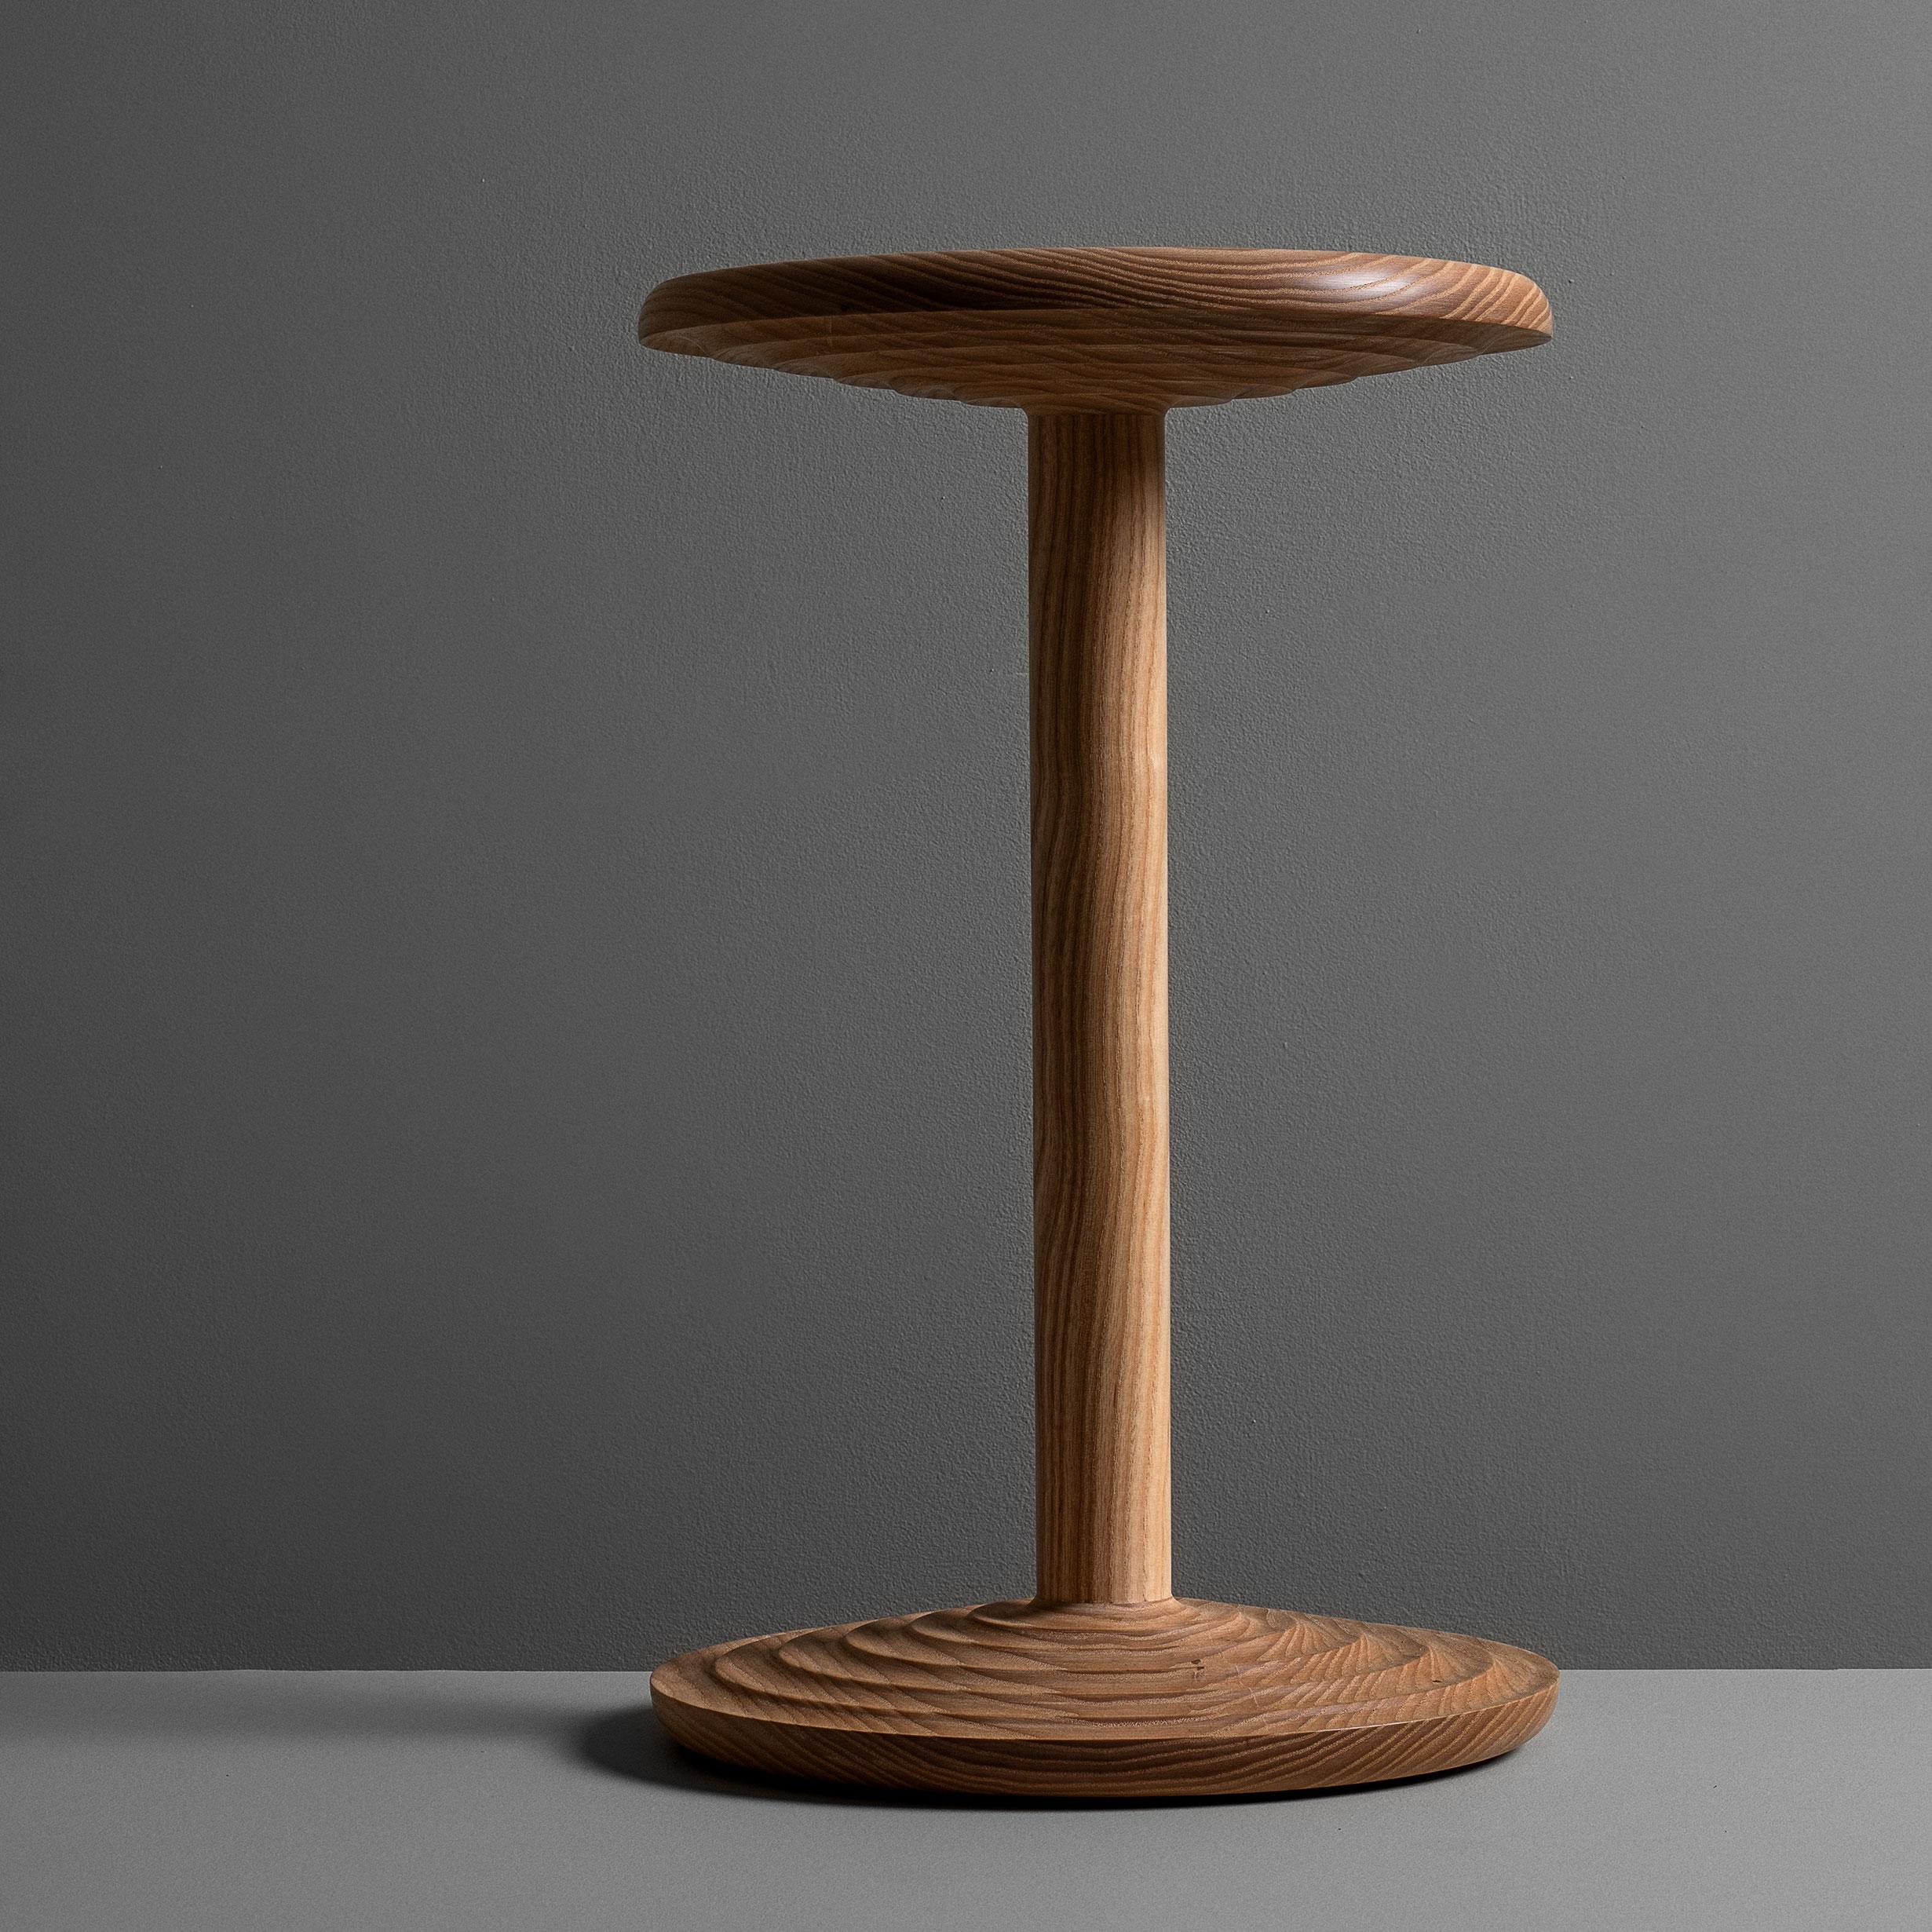 Beautifully hand turned and handcrafted white ash side table in the modernist design. Perfect in form and scale. This is a bespoke piece of fine quality, handmade by a master-craftsman in solid English Ash.


We design bold and distinctive pieces